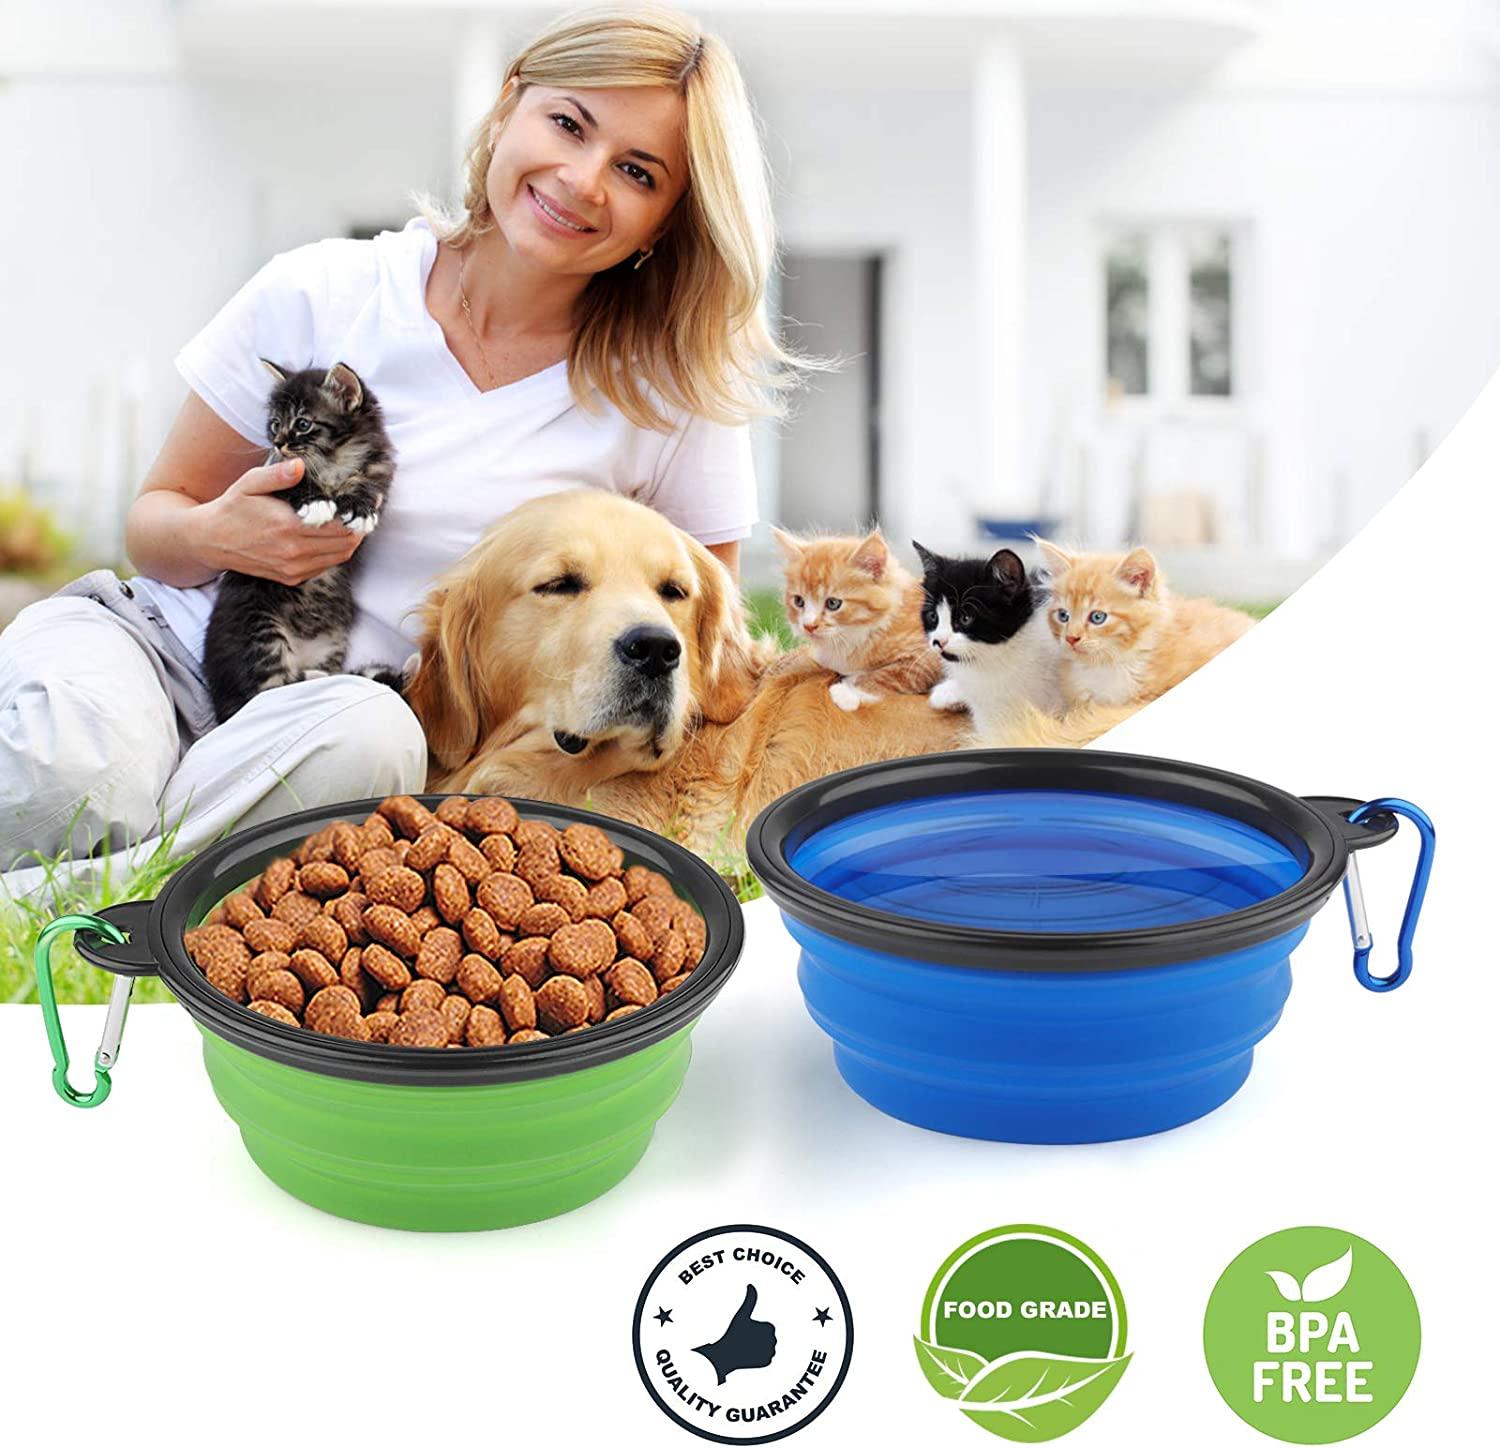 YiMee Collapsible Dog Bowl, Food Grade Silicone Portable Travel